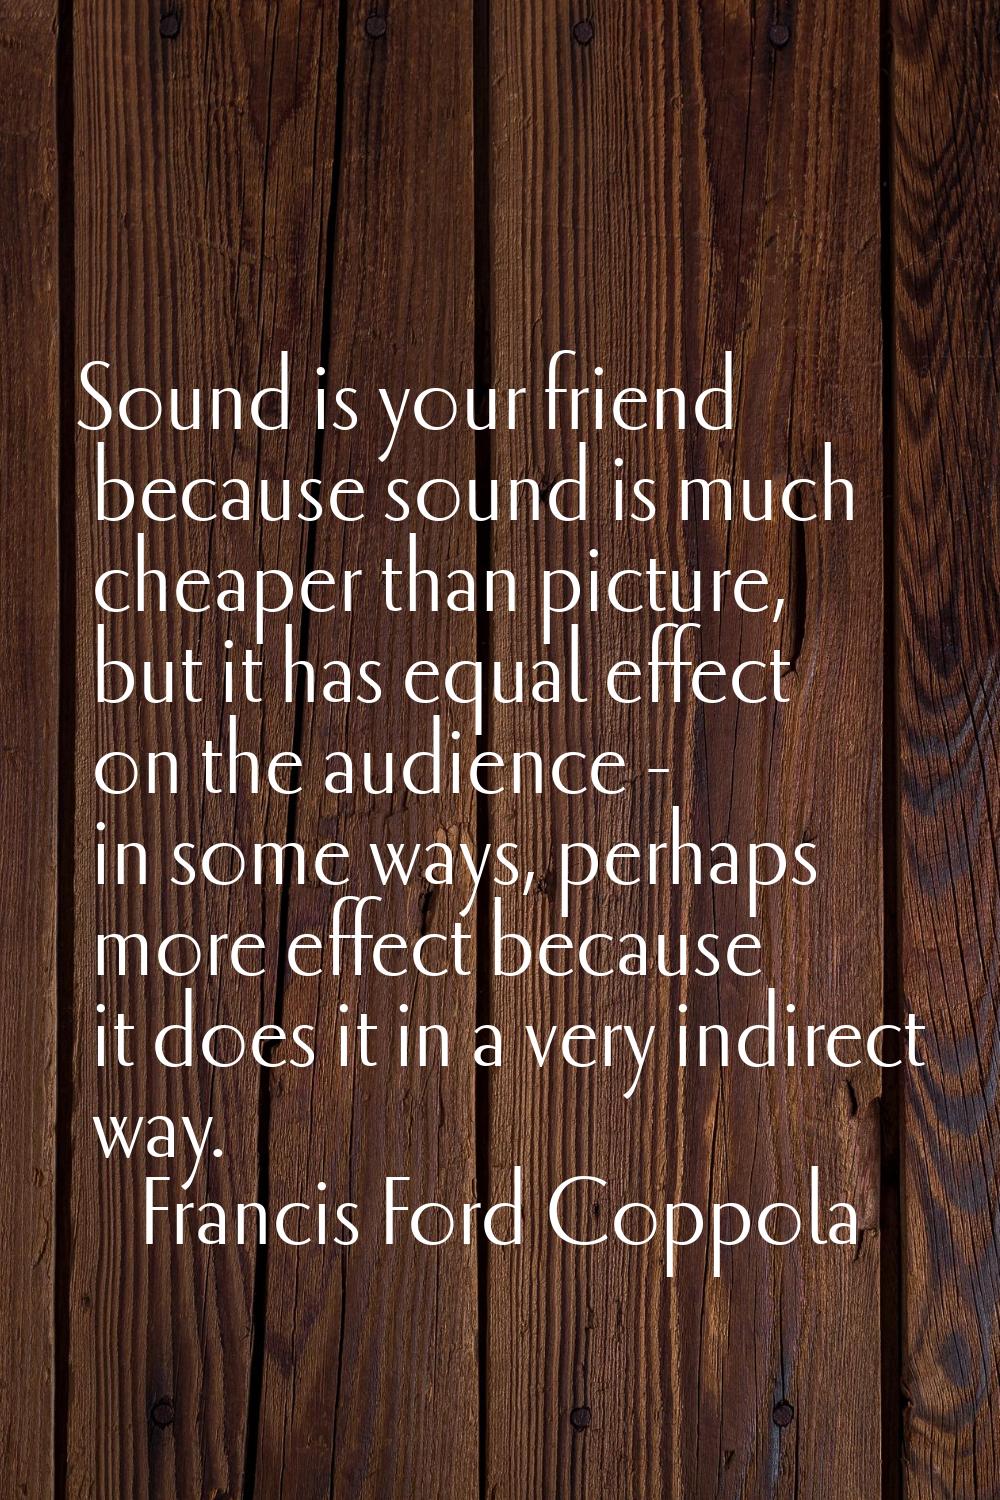 Sound is your friend because sound is much cheaper than picture, but it has equal effect on the aud